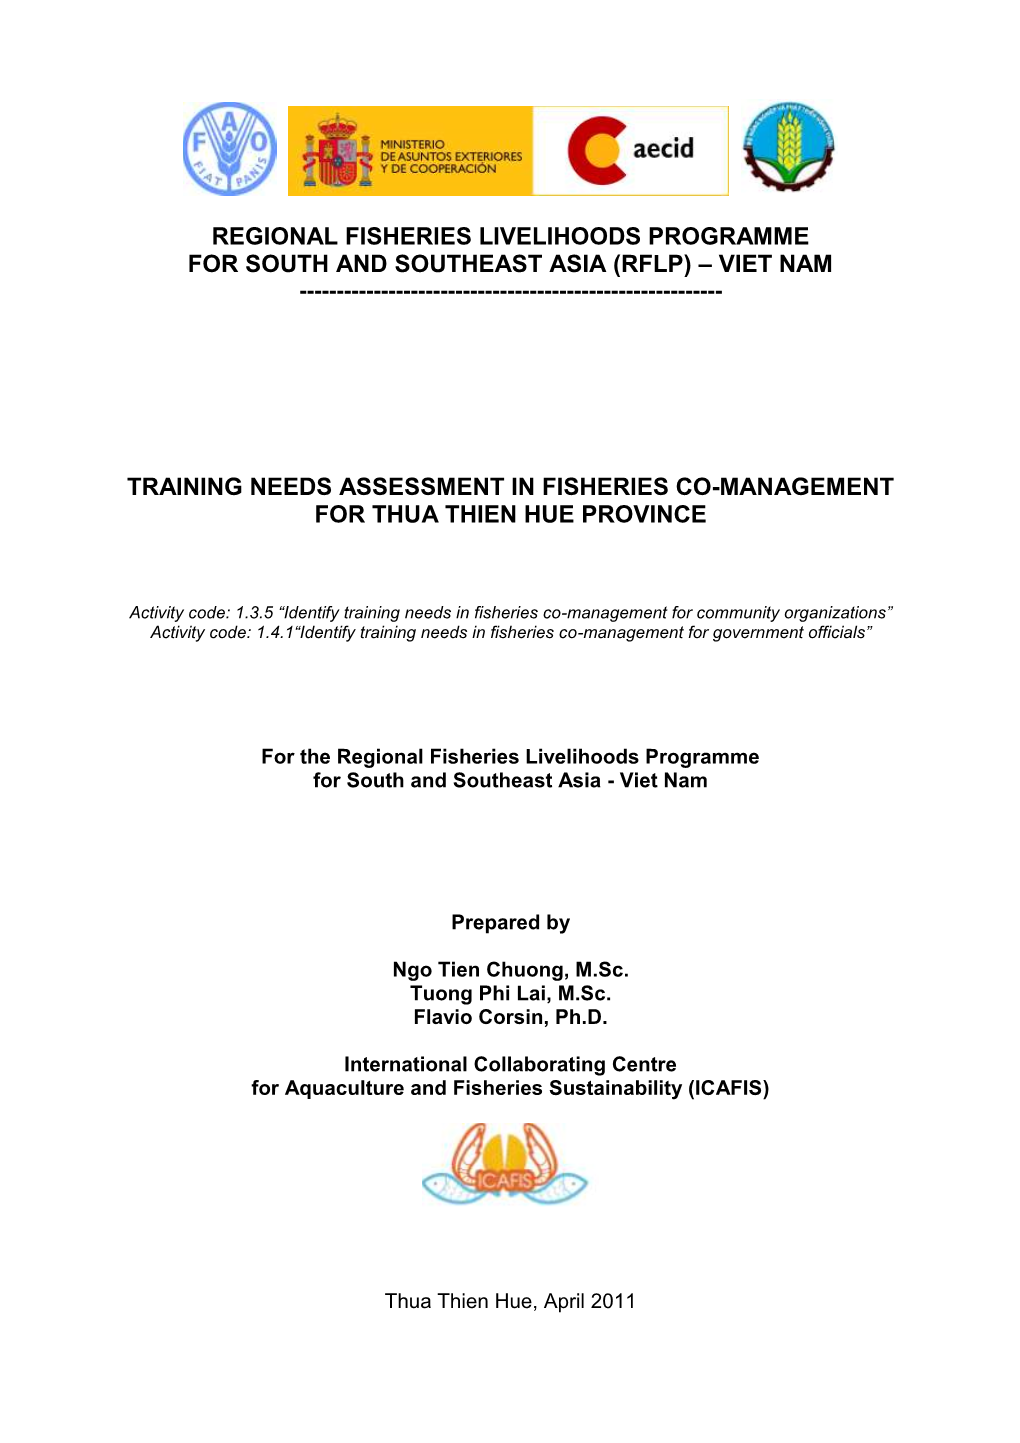 Regional Fisheries Livelihoods Programme for South and Southeast Asia (Rflp) – Viet Nam Training Needs Assessment in Fisheries